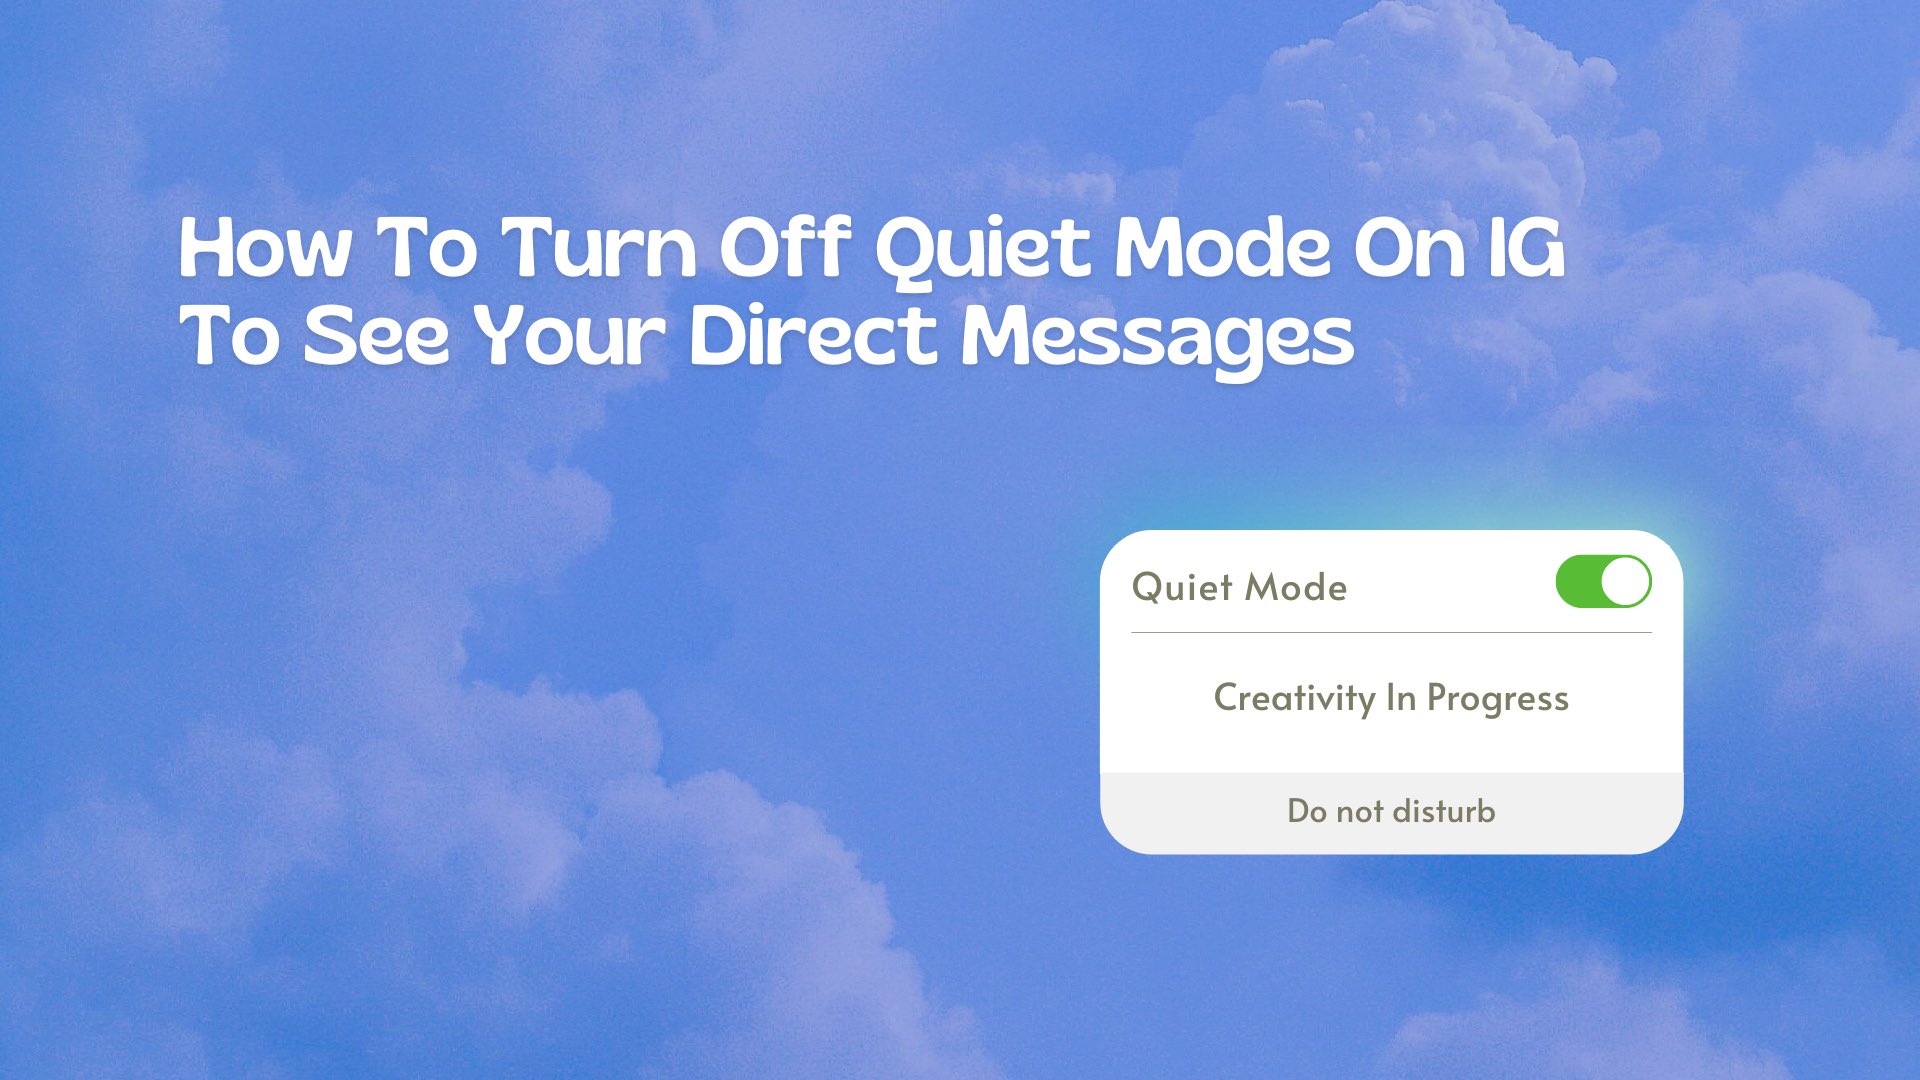 How To Turn Off Quiet Mode On IG To See Your Direct Messages